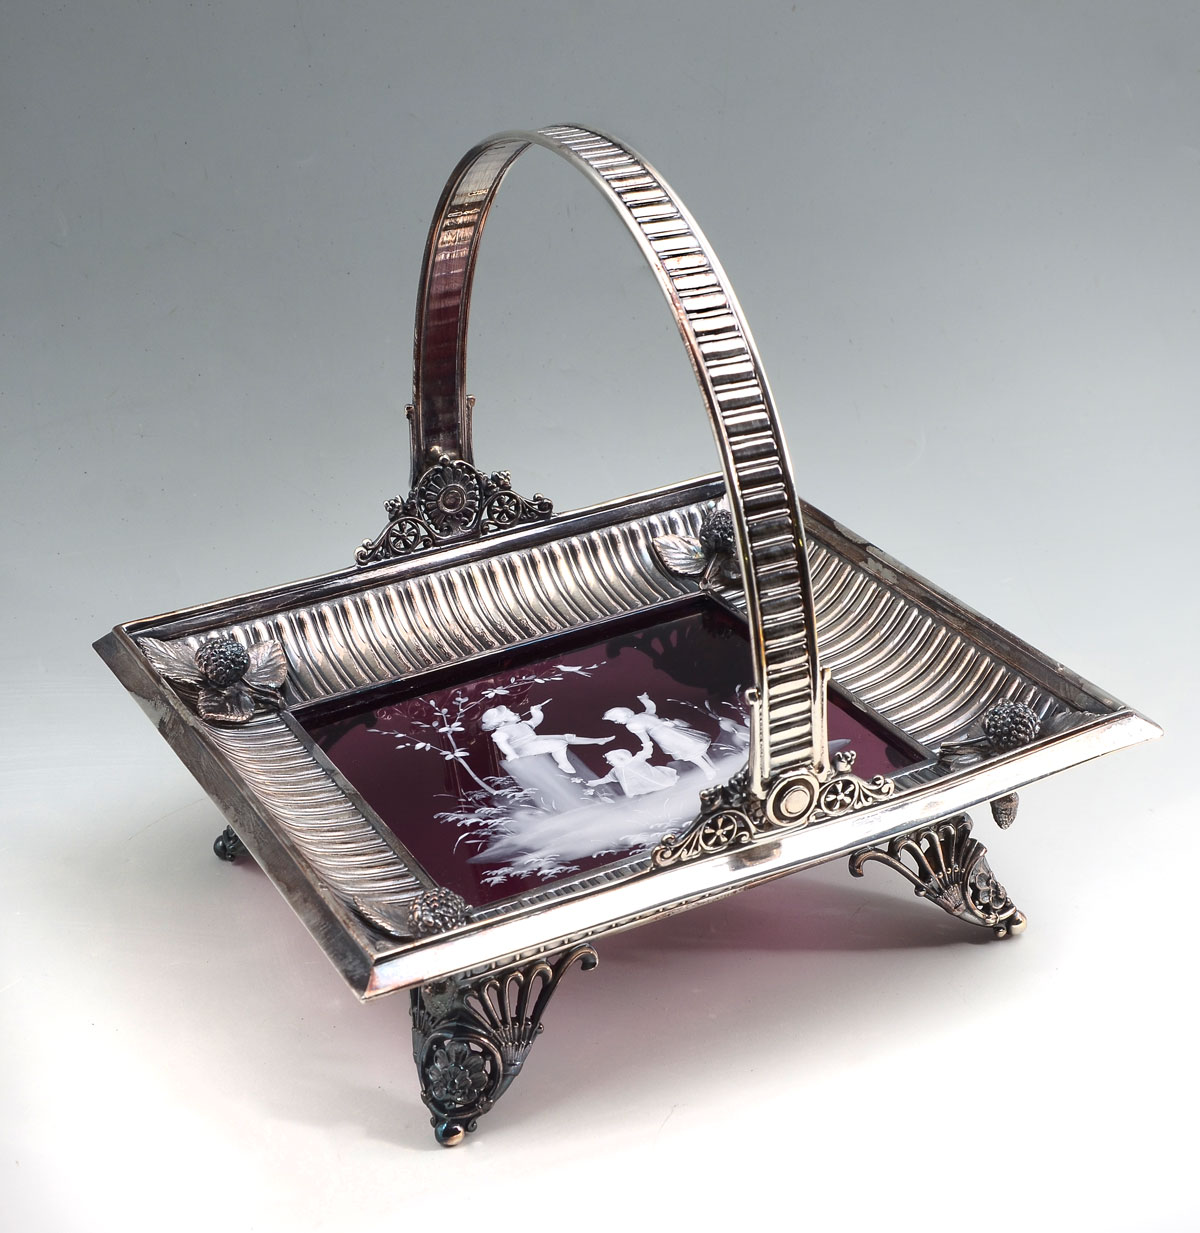 MARY GREGORY AMETHYST TRAY: Square